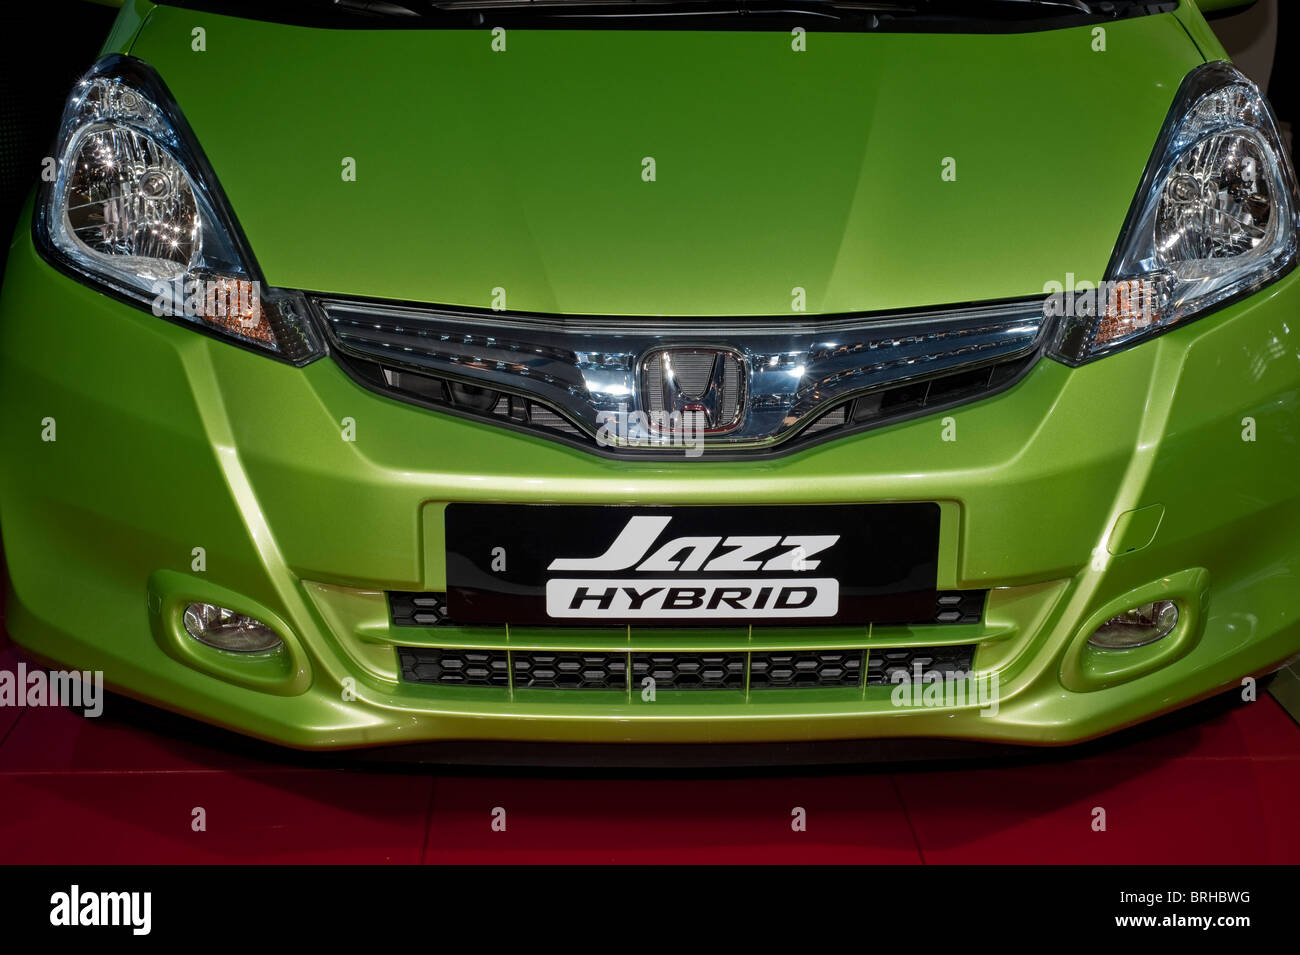 Pa-ris, France, Car Show, Electric Car, Honda Jazz, Hybrid Engine, Detail Front Grill, display, showroom, logo, front Stock Photo